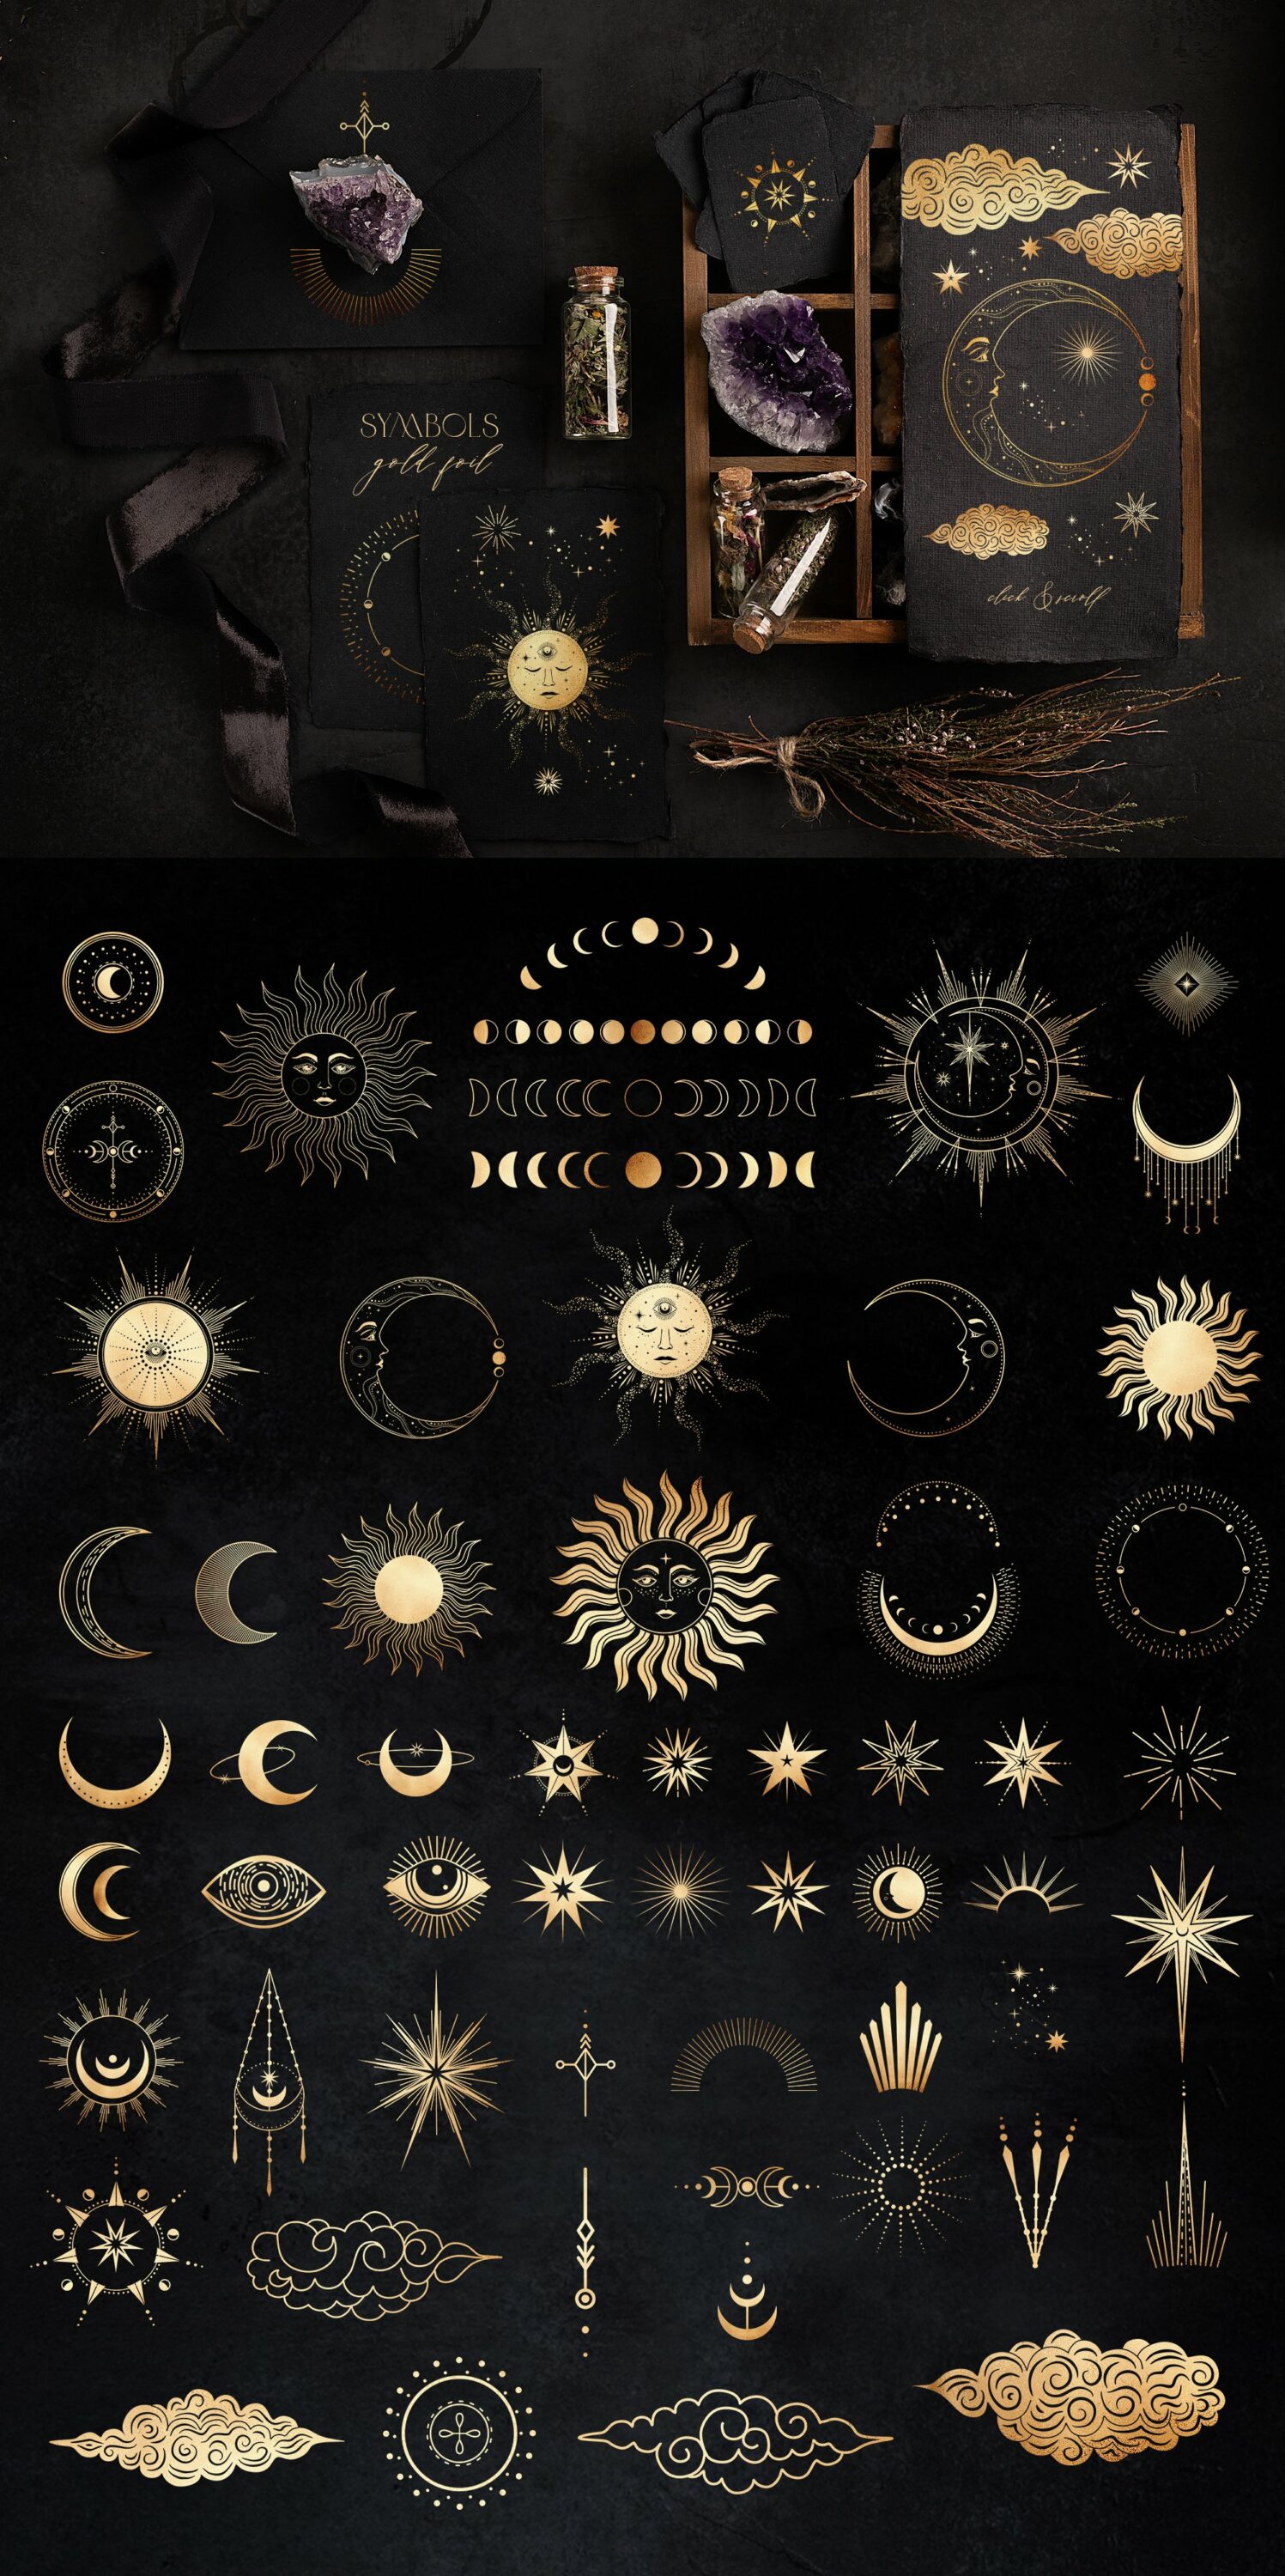 So beautiful and creative gold illustrations for your zodiac composition.